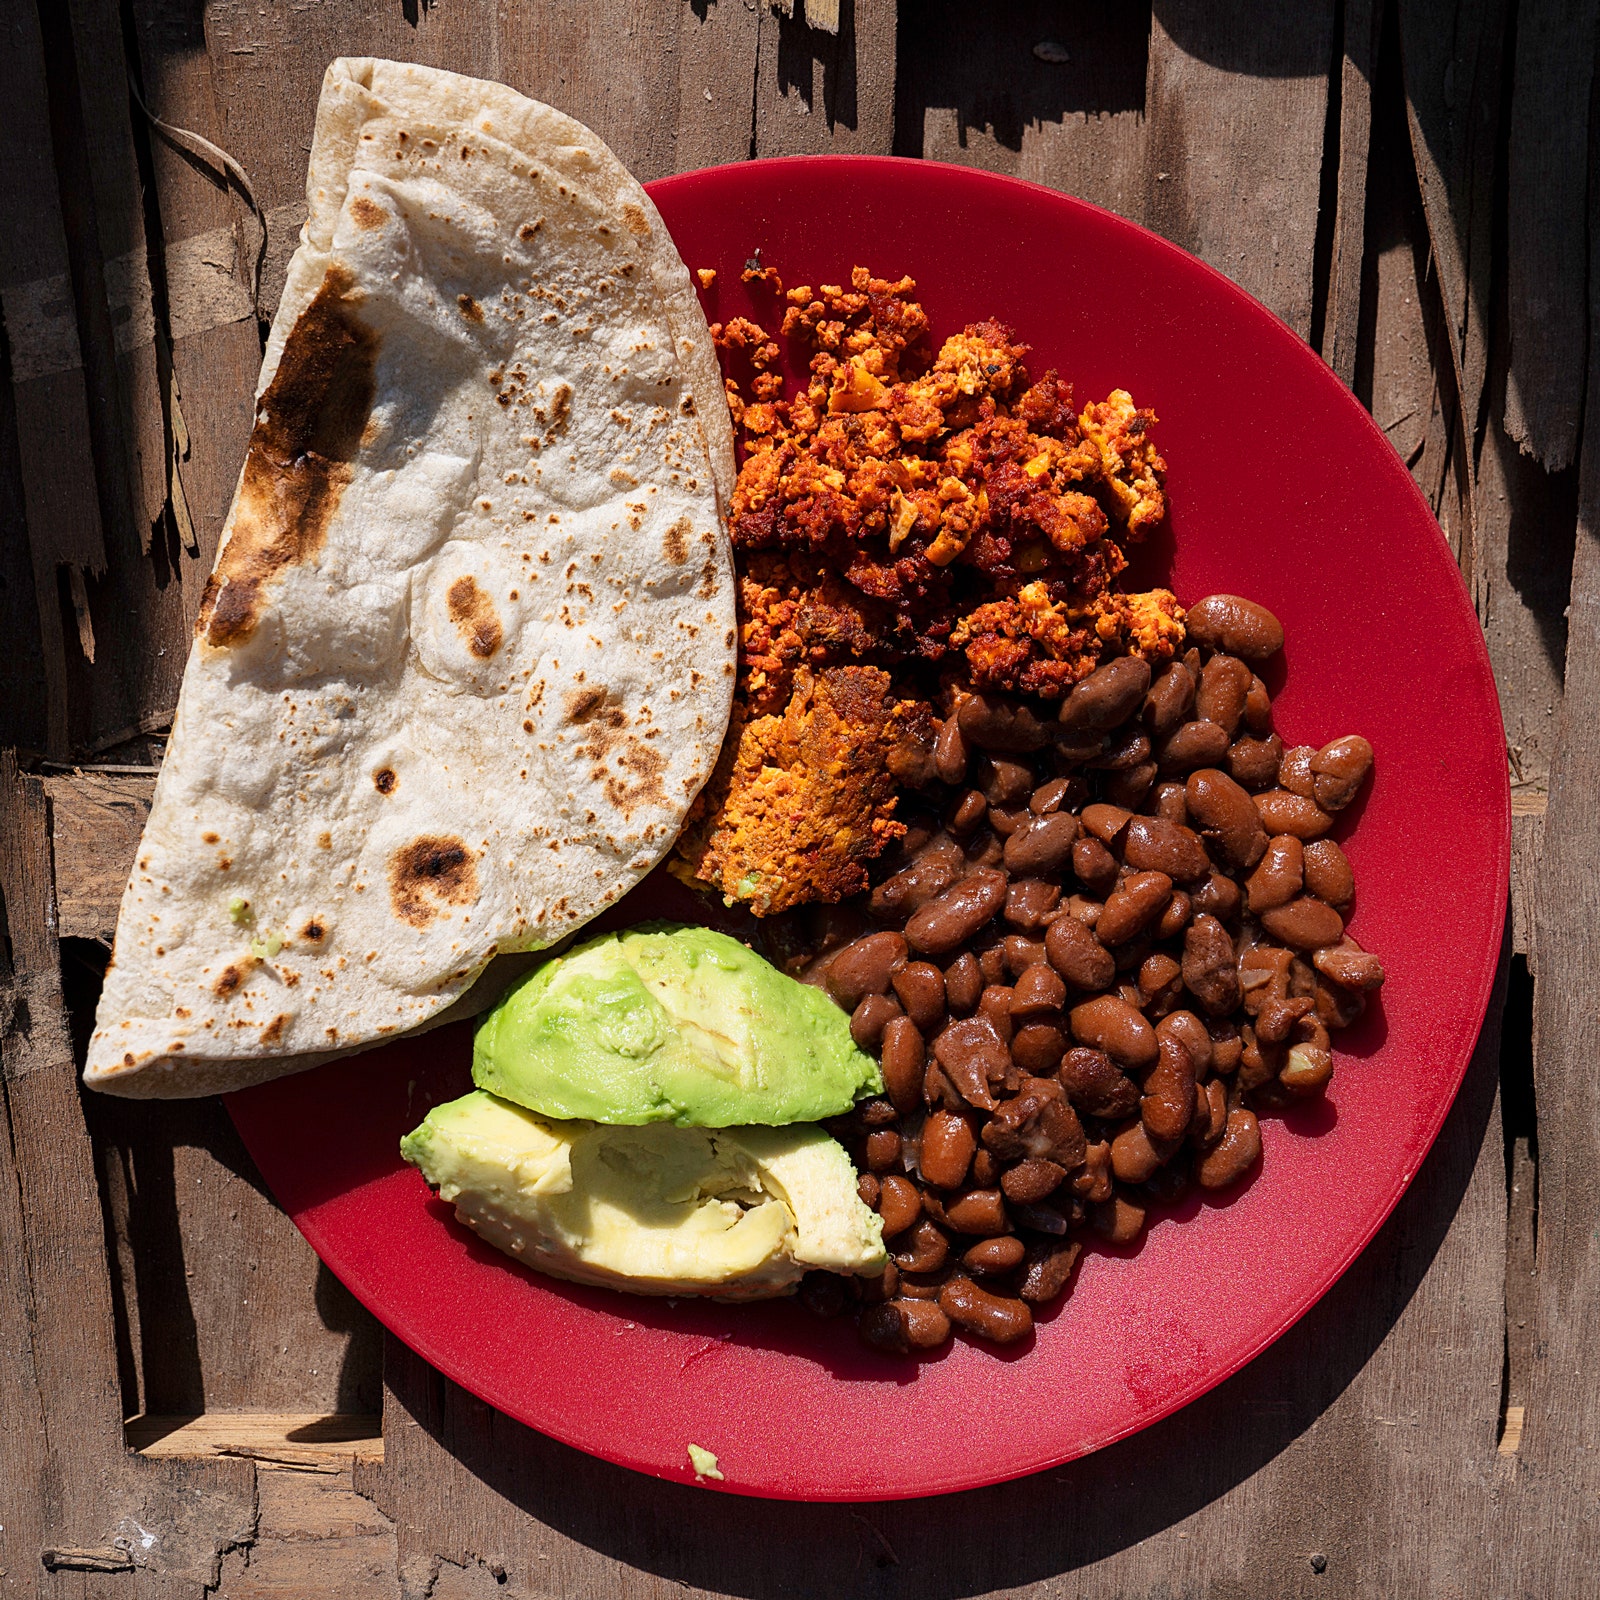 Honduran asylum seeker Jennys cooked meal is seen in an encampment where she lives with approximately 2000 other people...